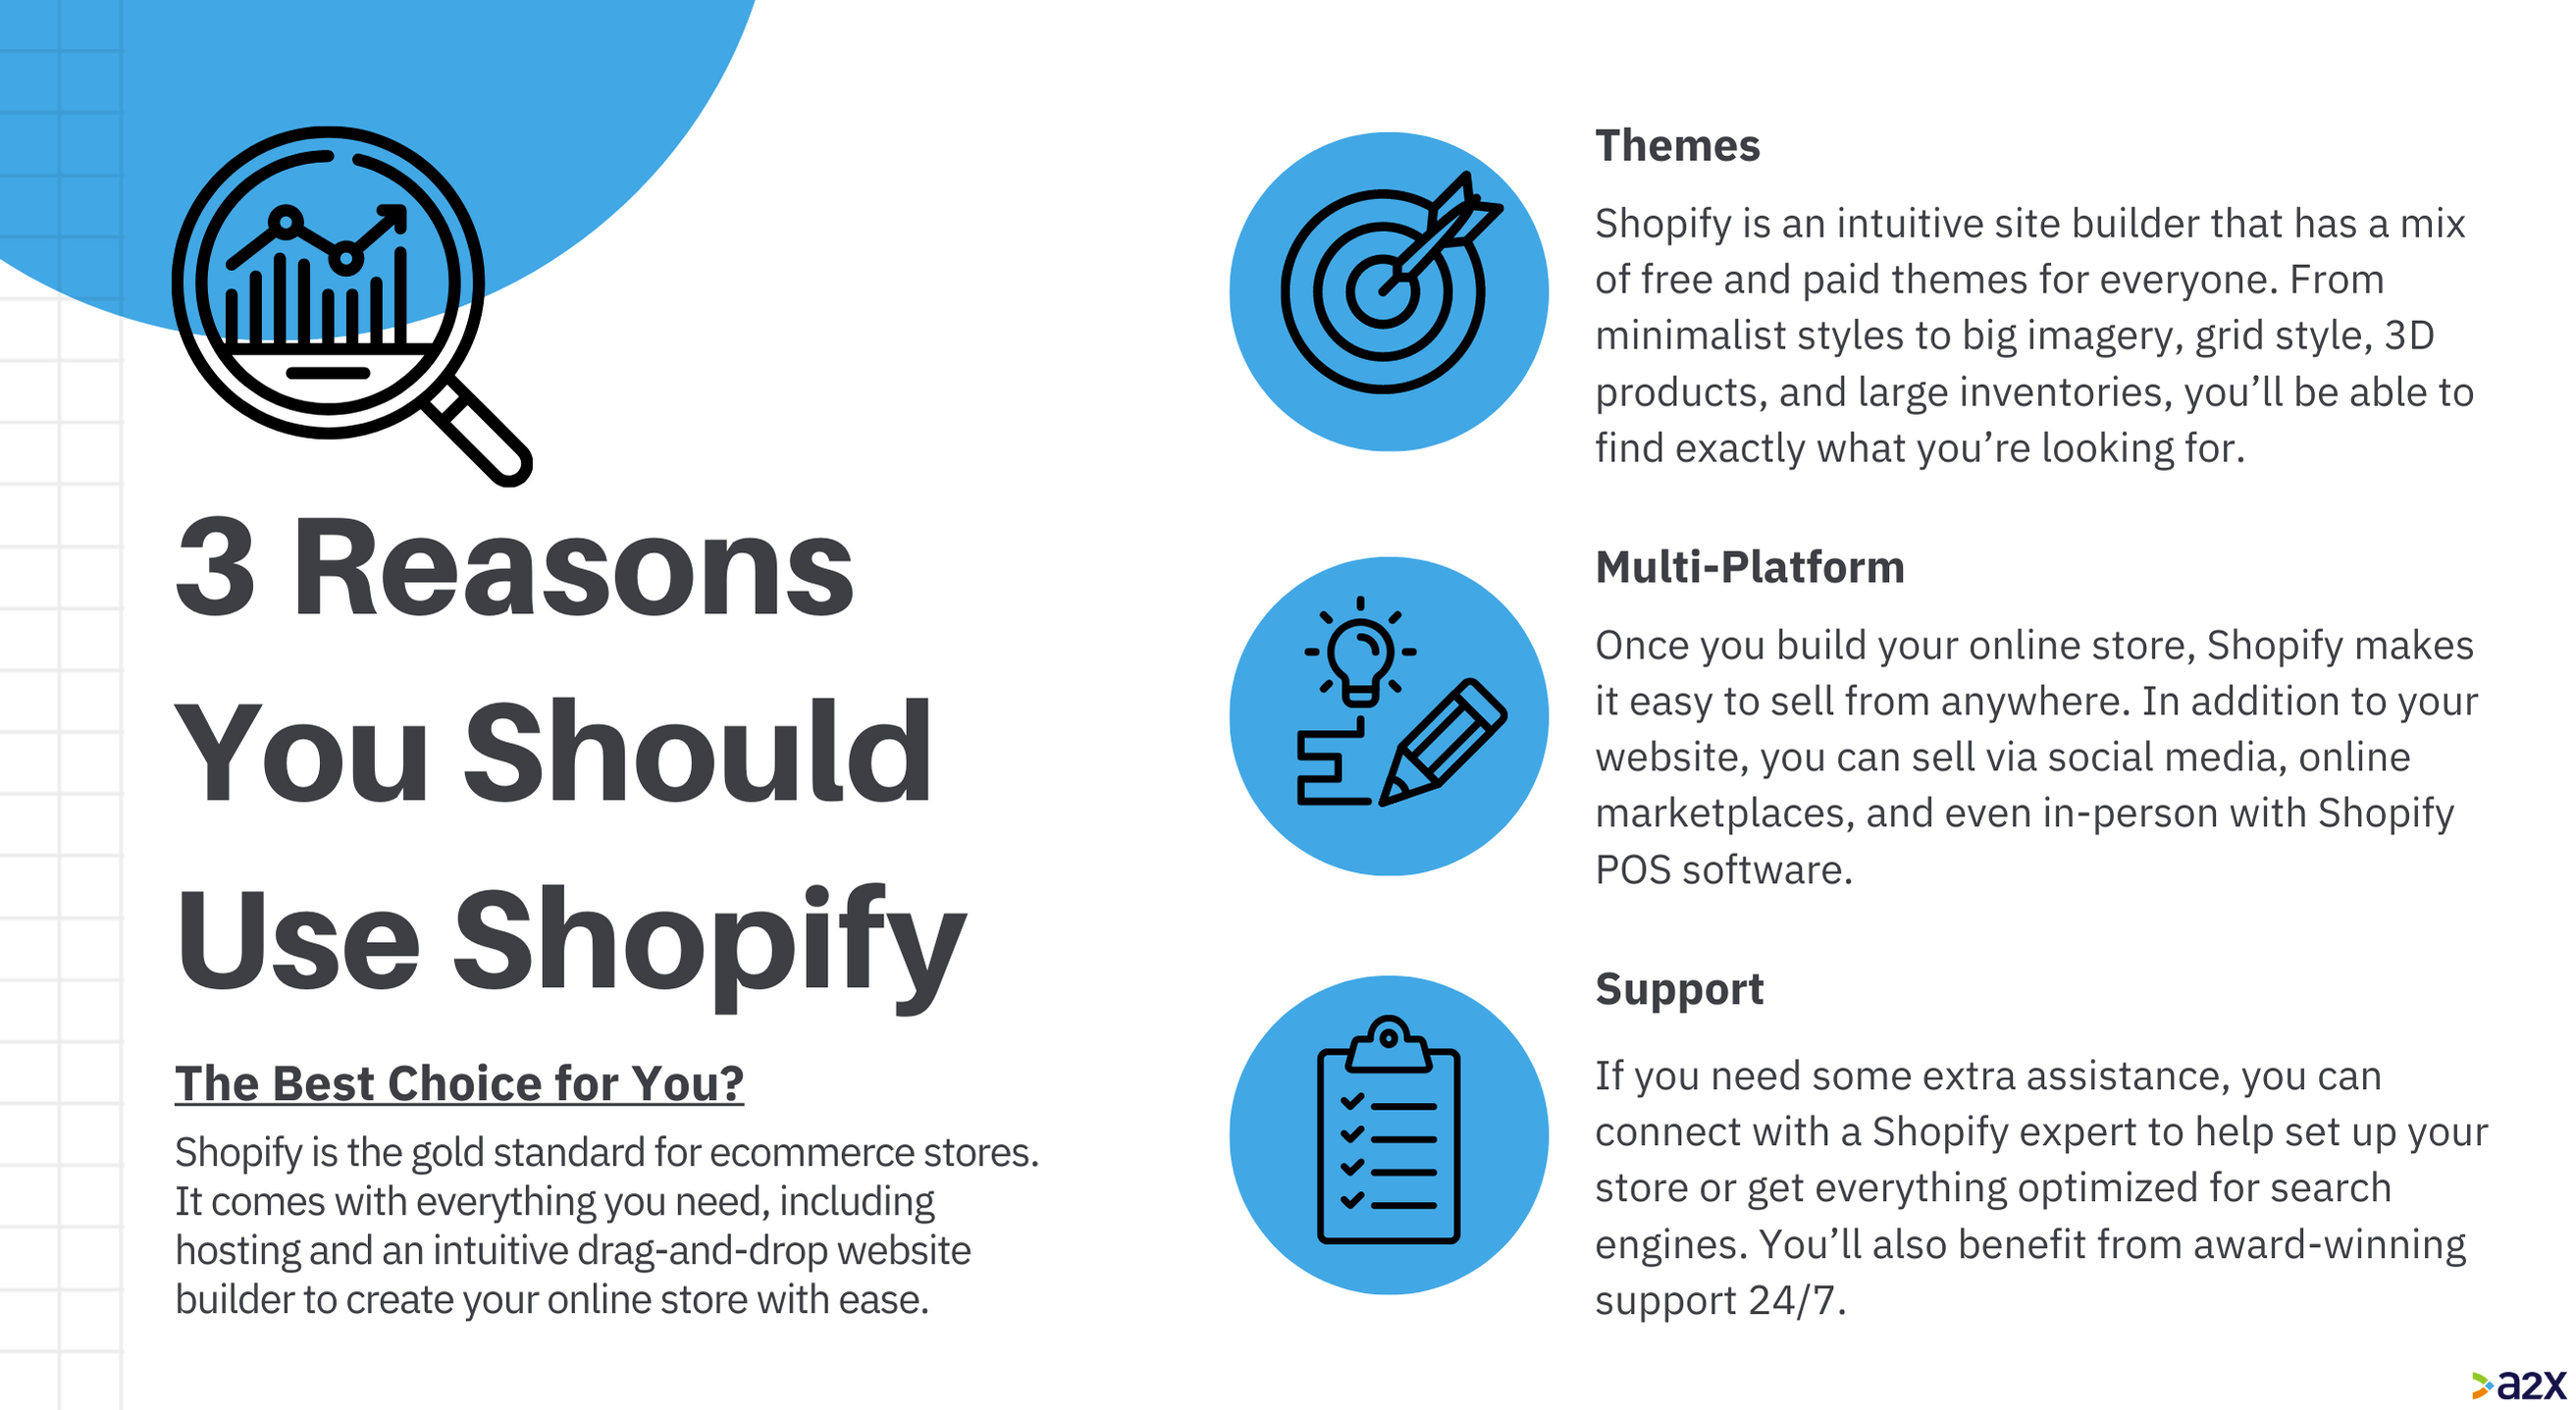 An image giving 3 reasons why you should use shopify, including: themes, multi-platform options, and support